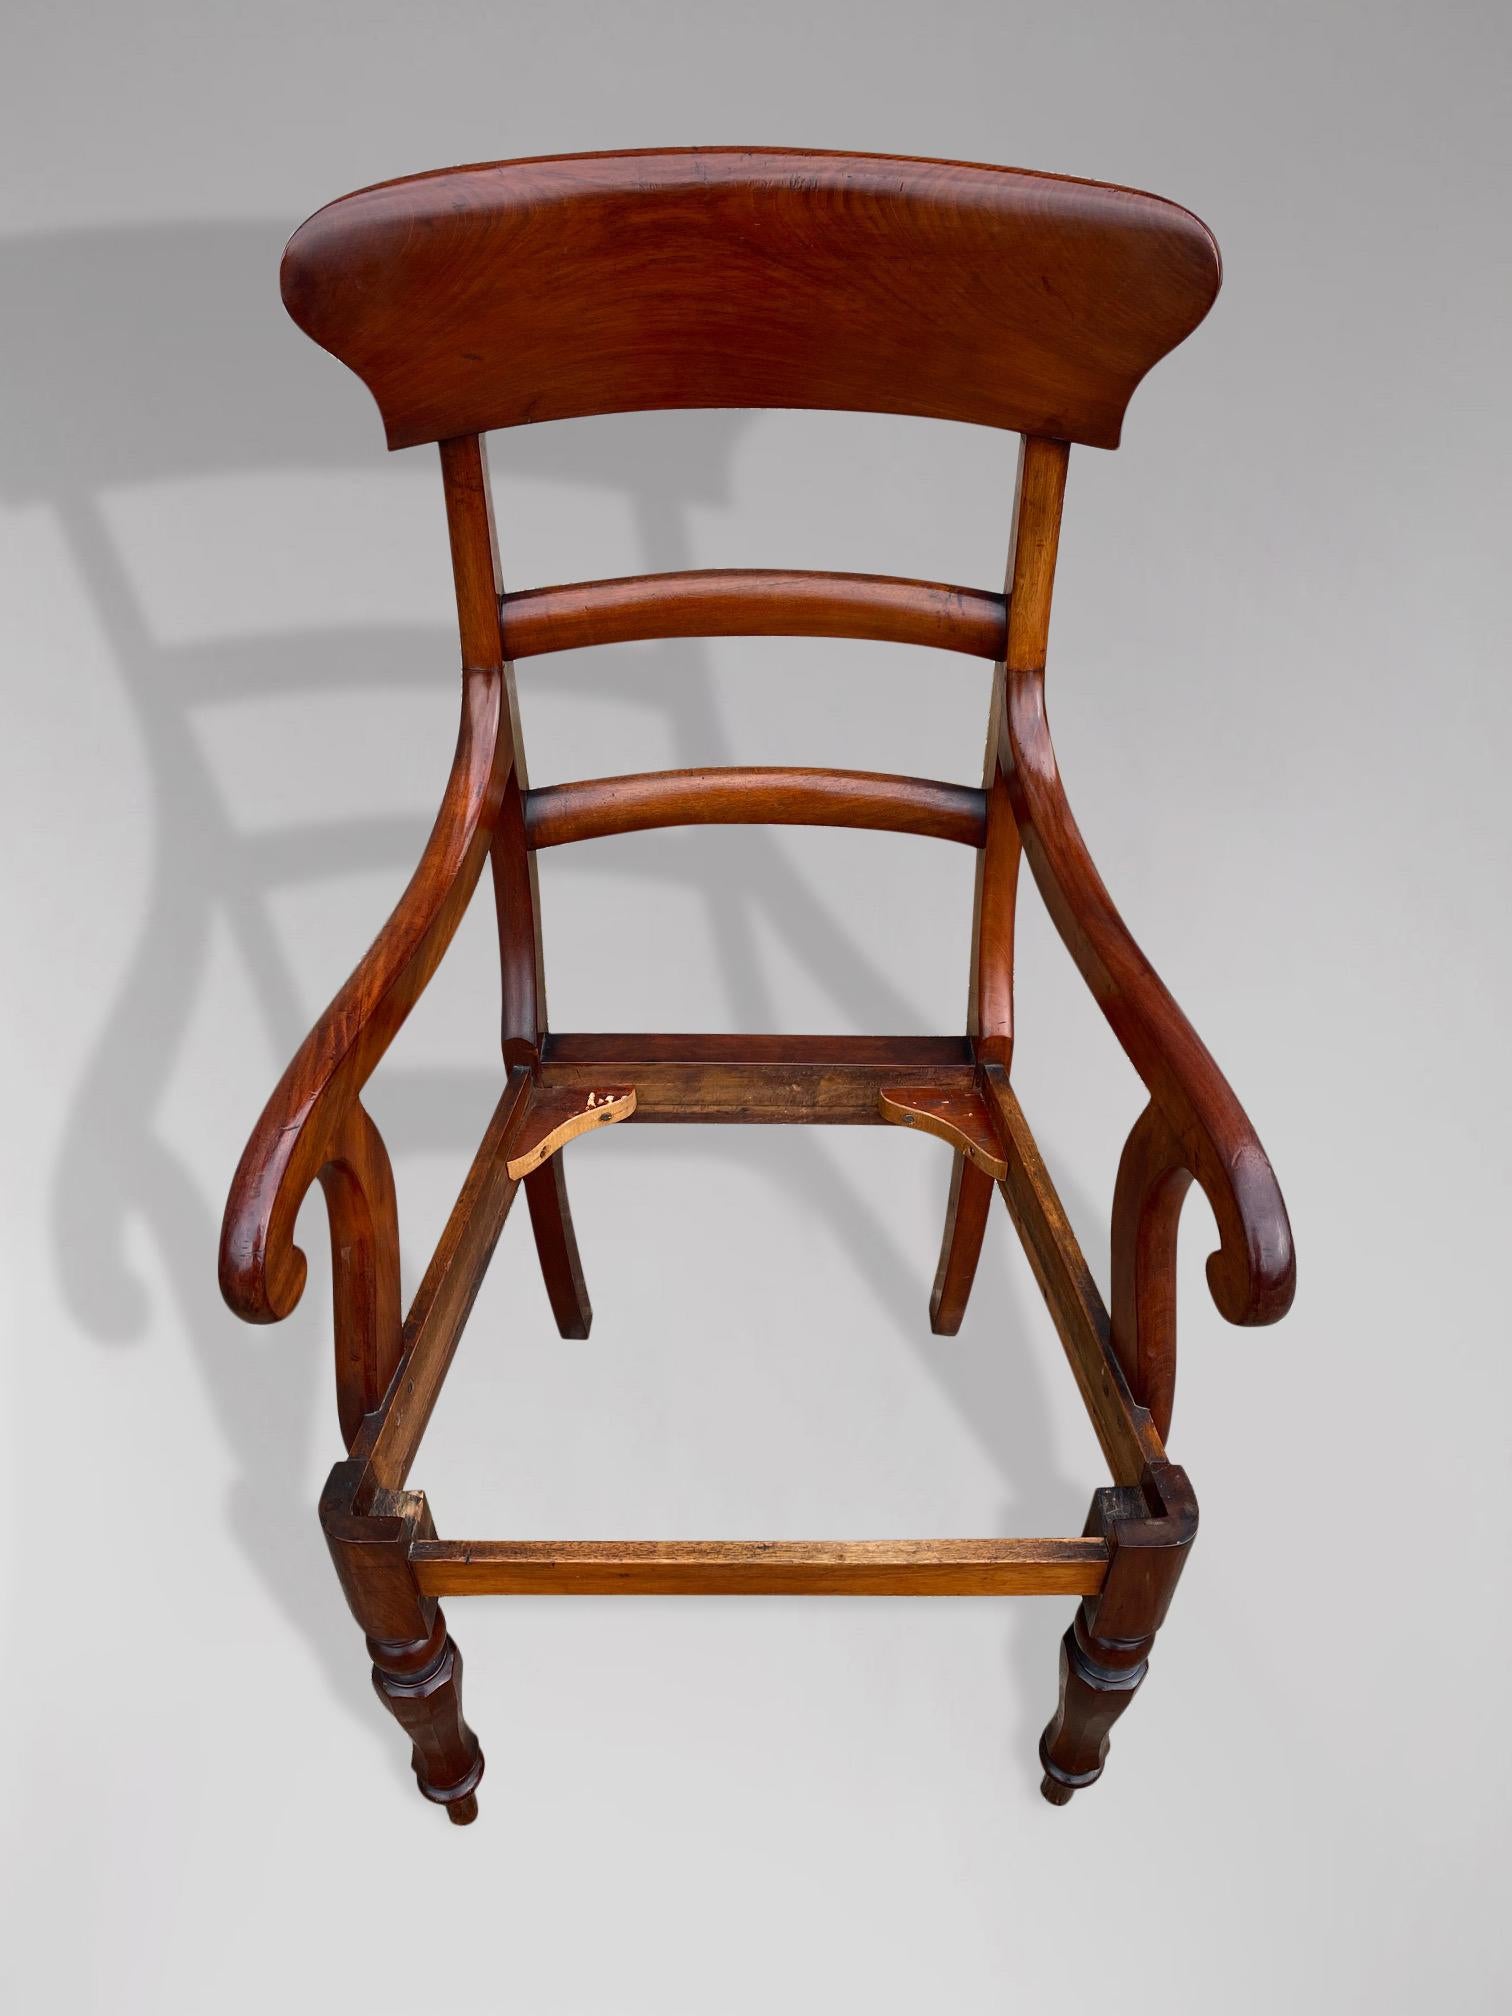 British 19th Century Mahogany High Back Side or Desk Armchair For Sale